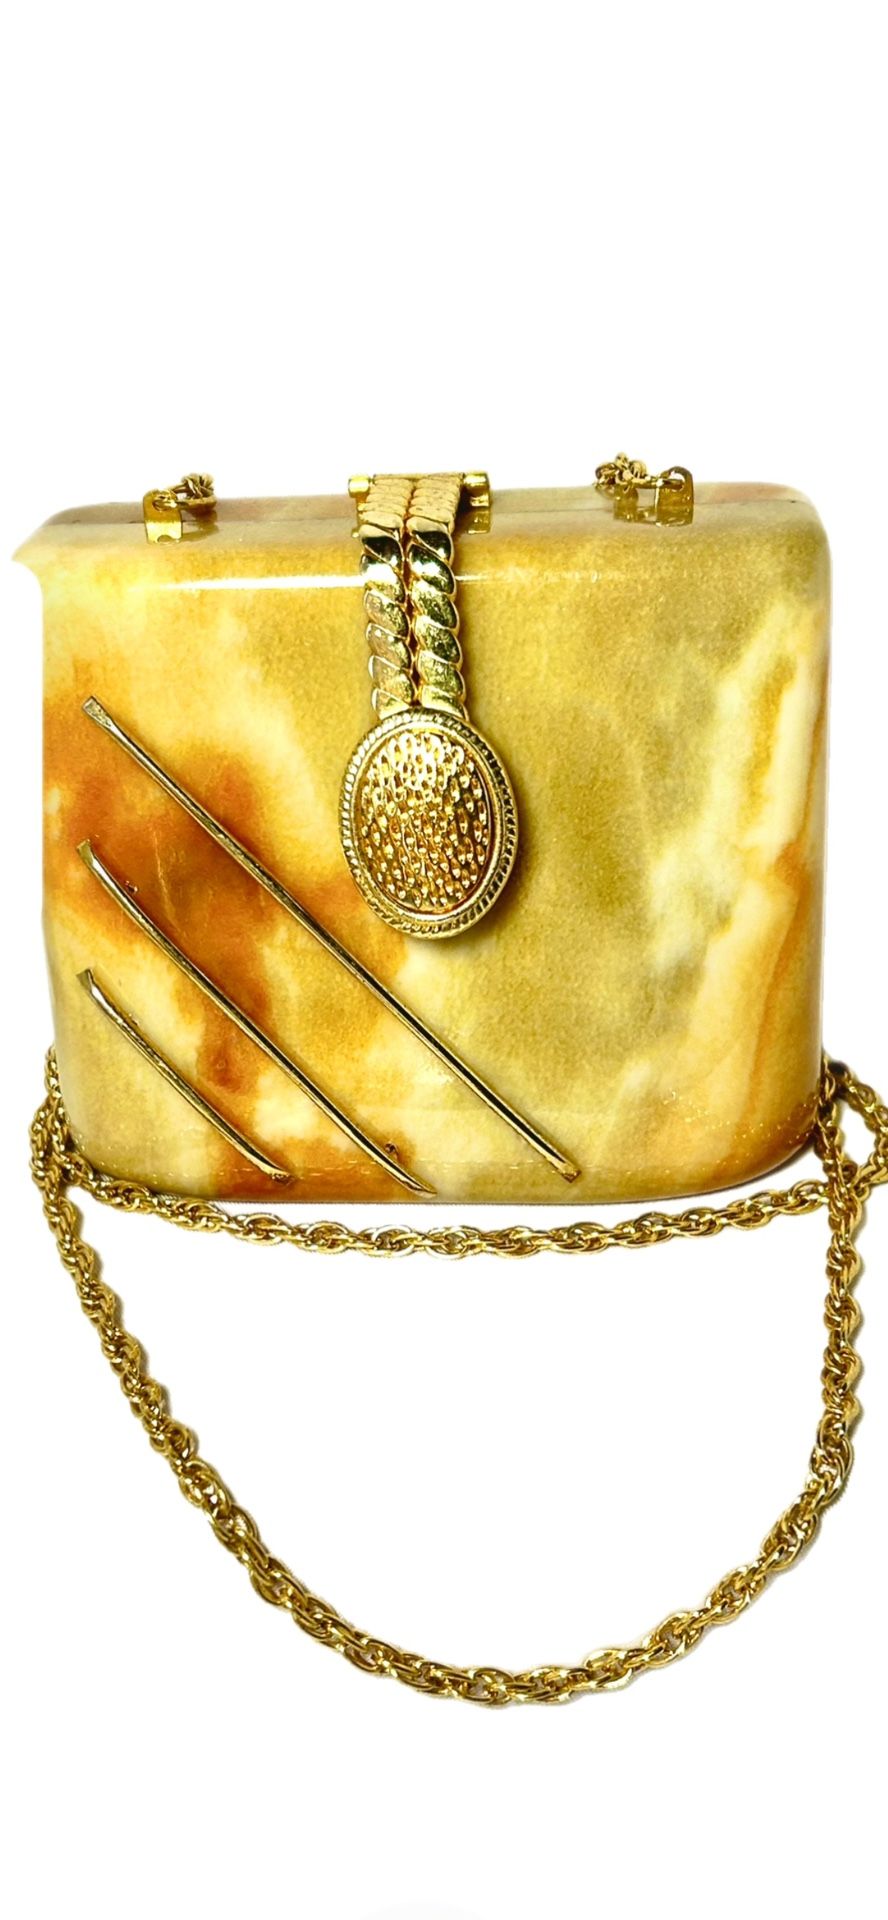 Y &S hard sided marbled look clutch cross body purse with gold chain. vintage